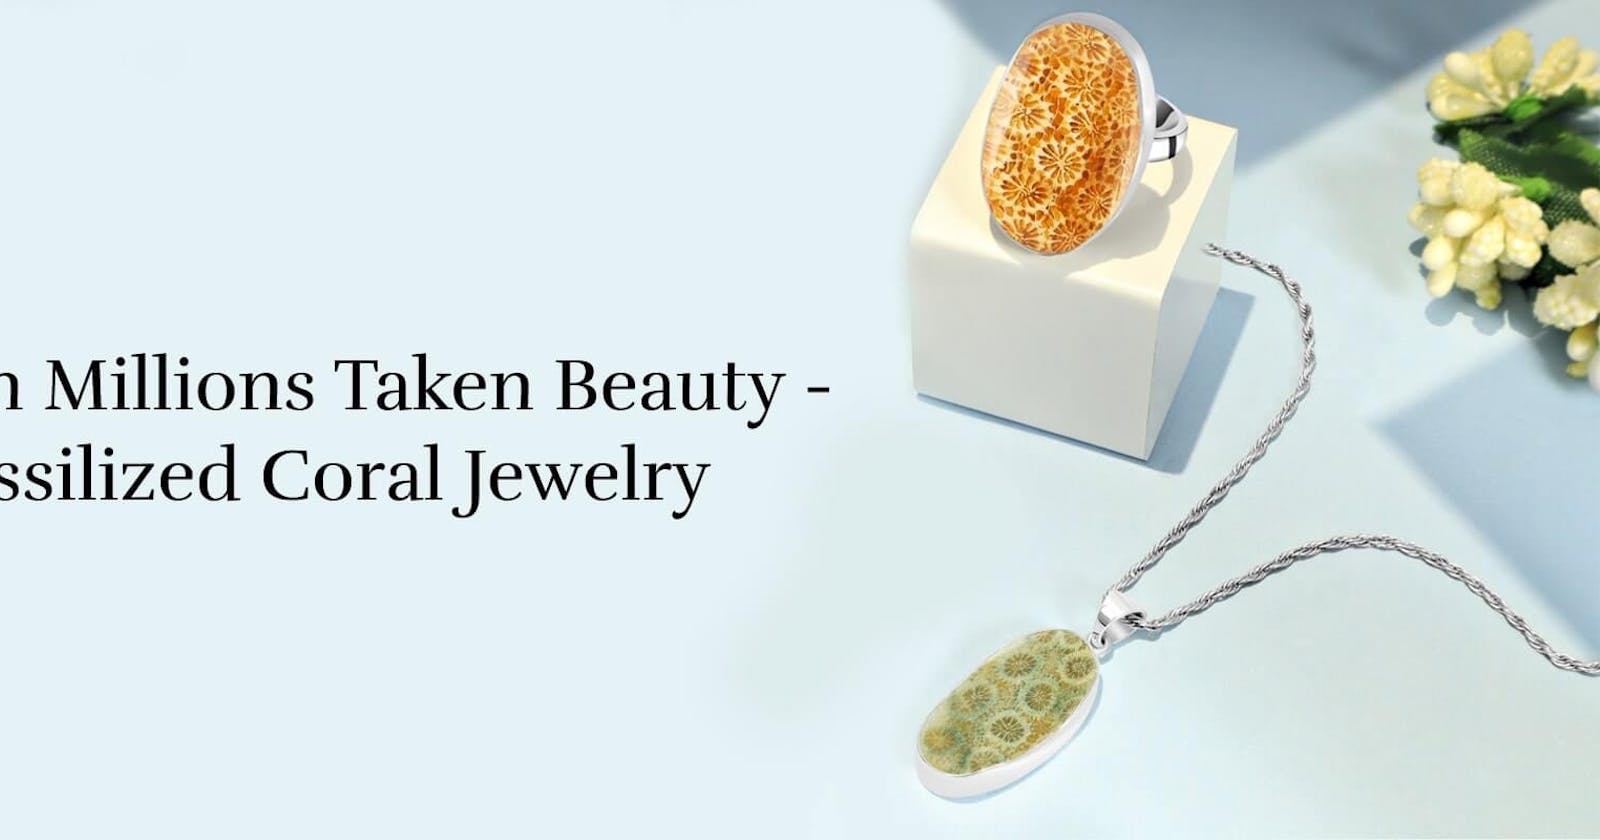 Oceanic Legacy: Fossilized Coral Jewelry for Eternal Beauty